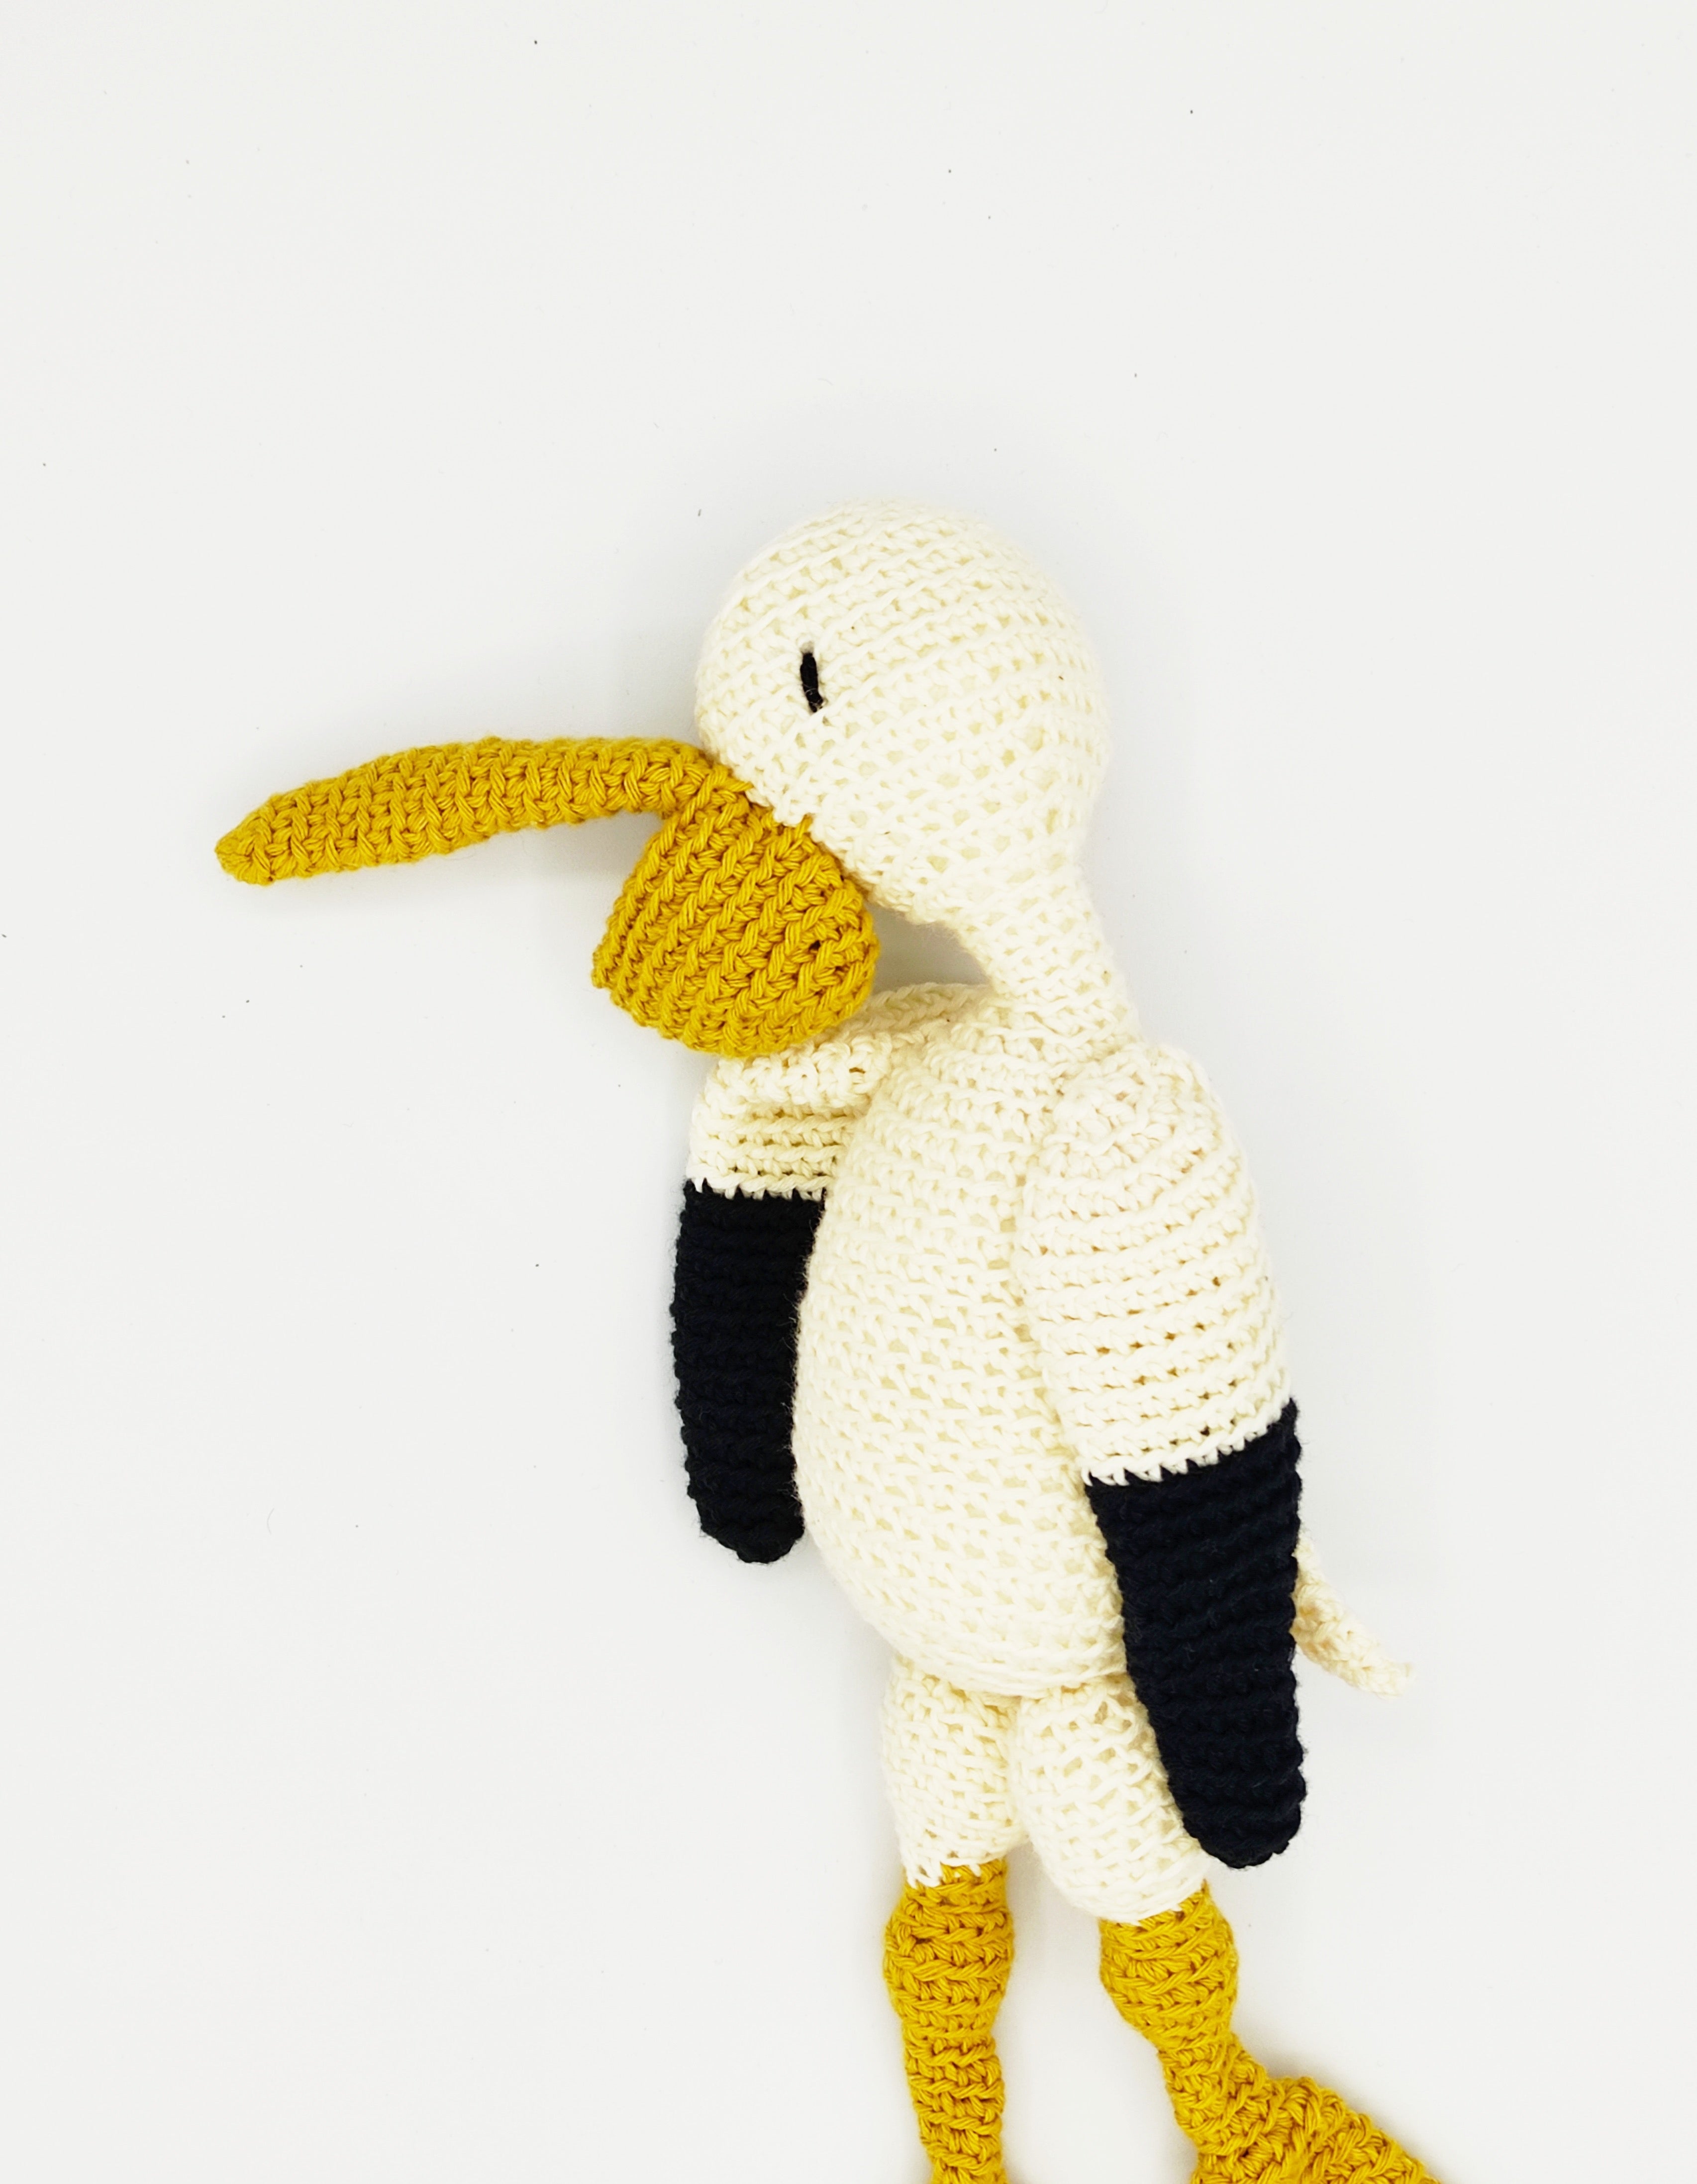 Maurice the Pelican